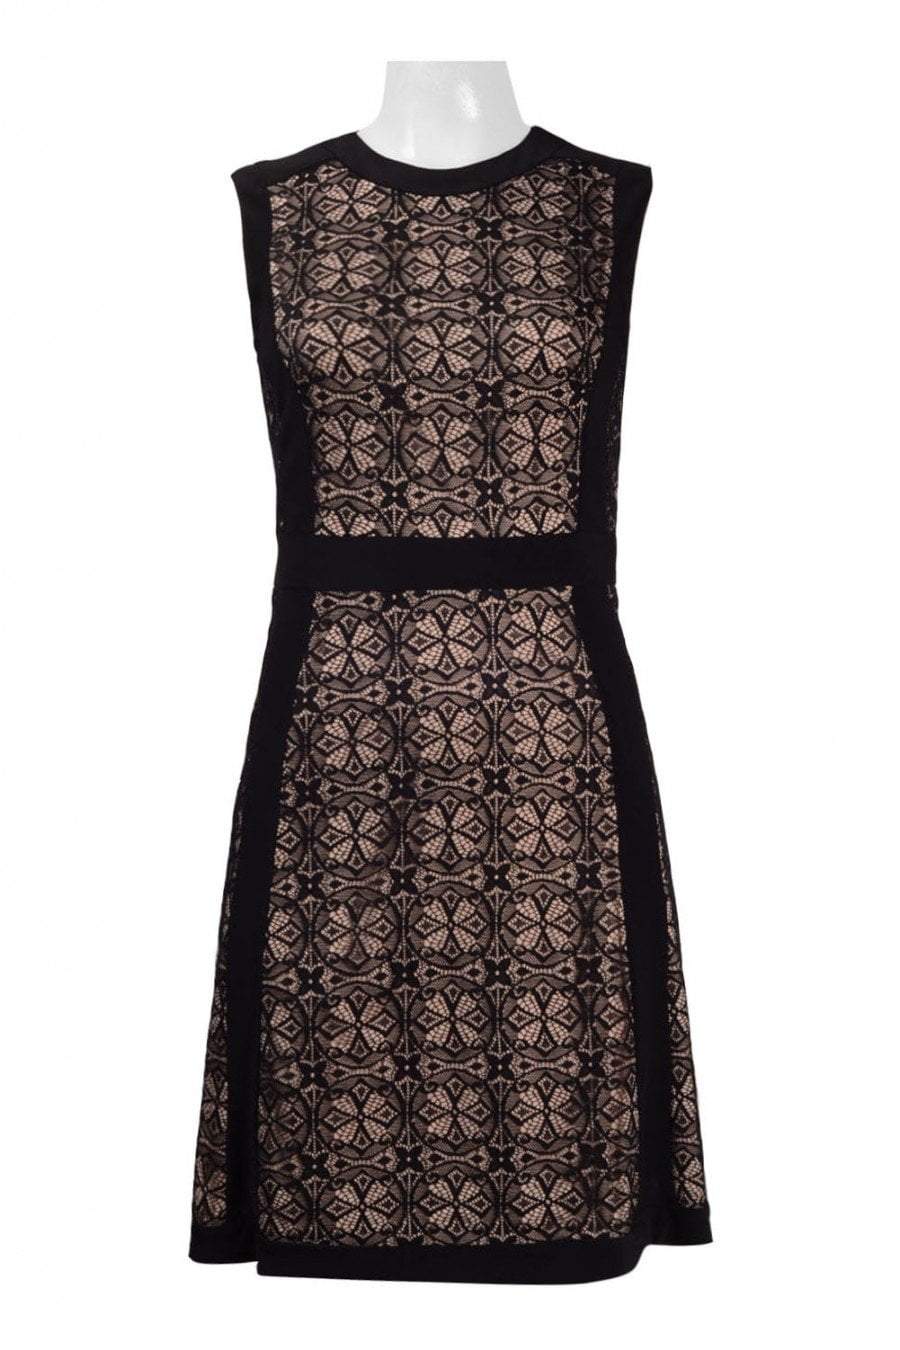 Adrianna Papell - AP1D100368 Sleeveless Lace Jewel Neck A-line Dress In Black